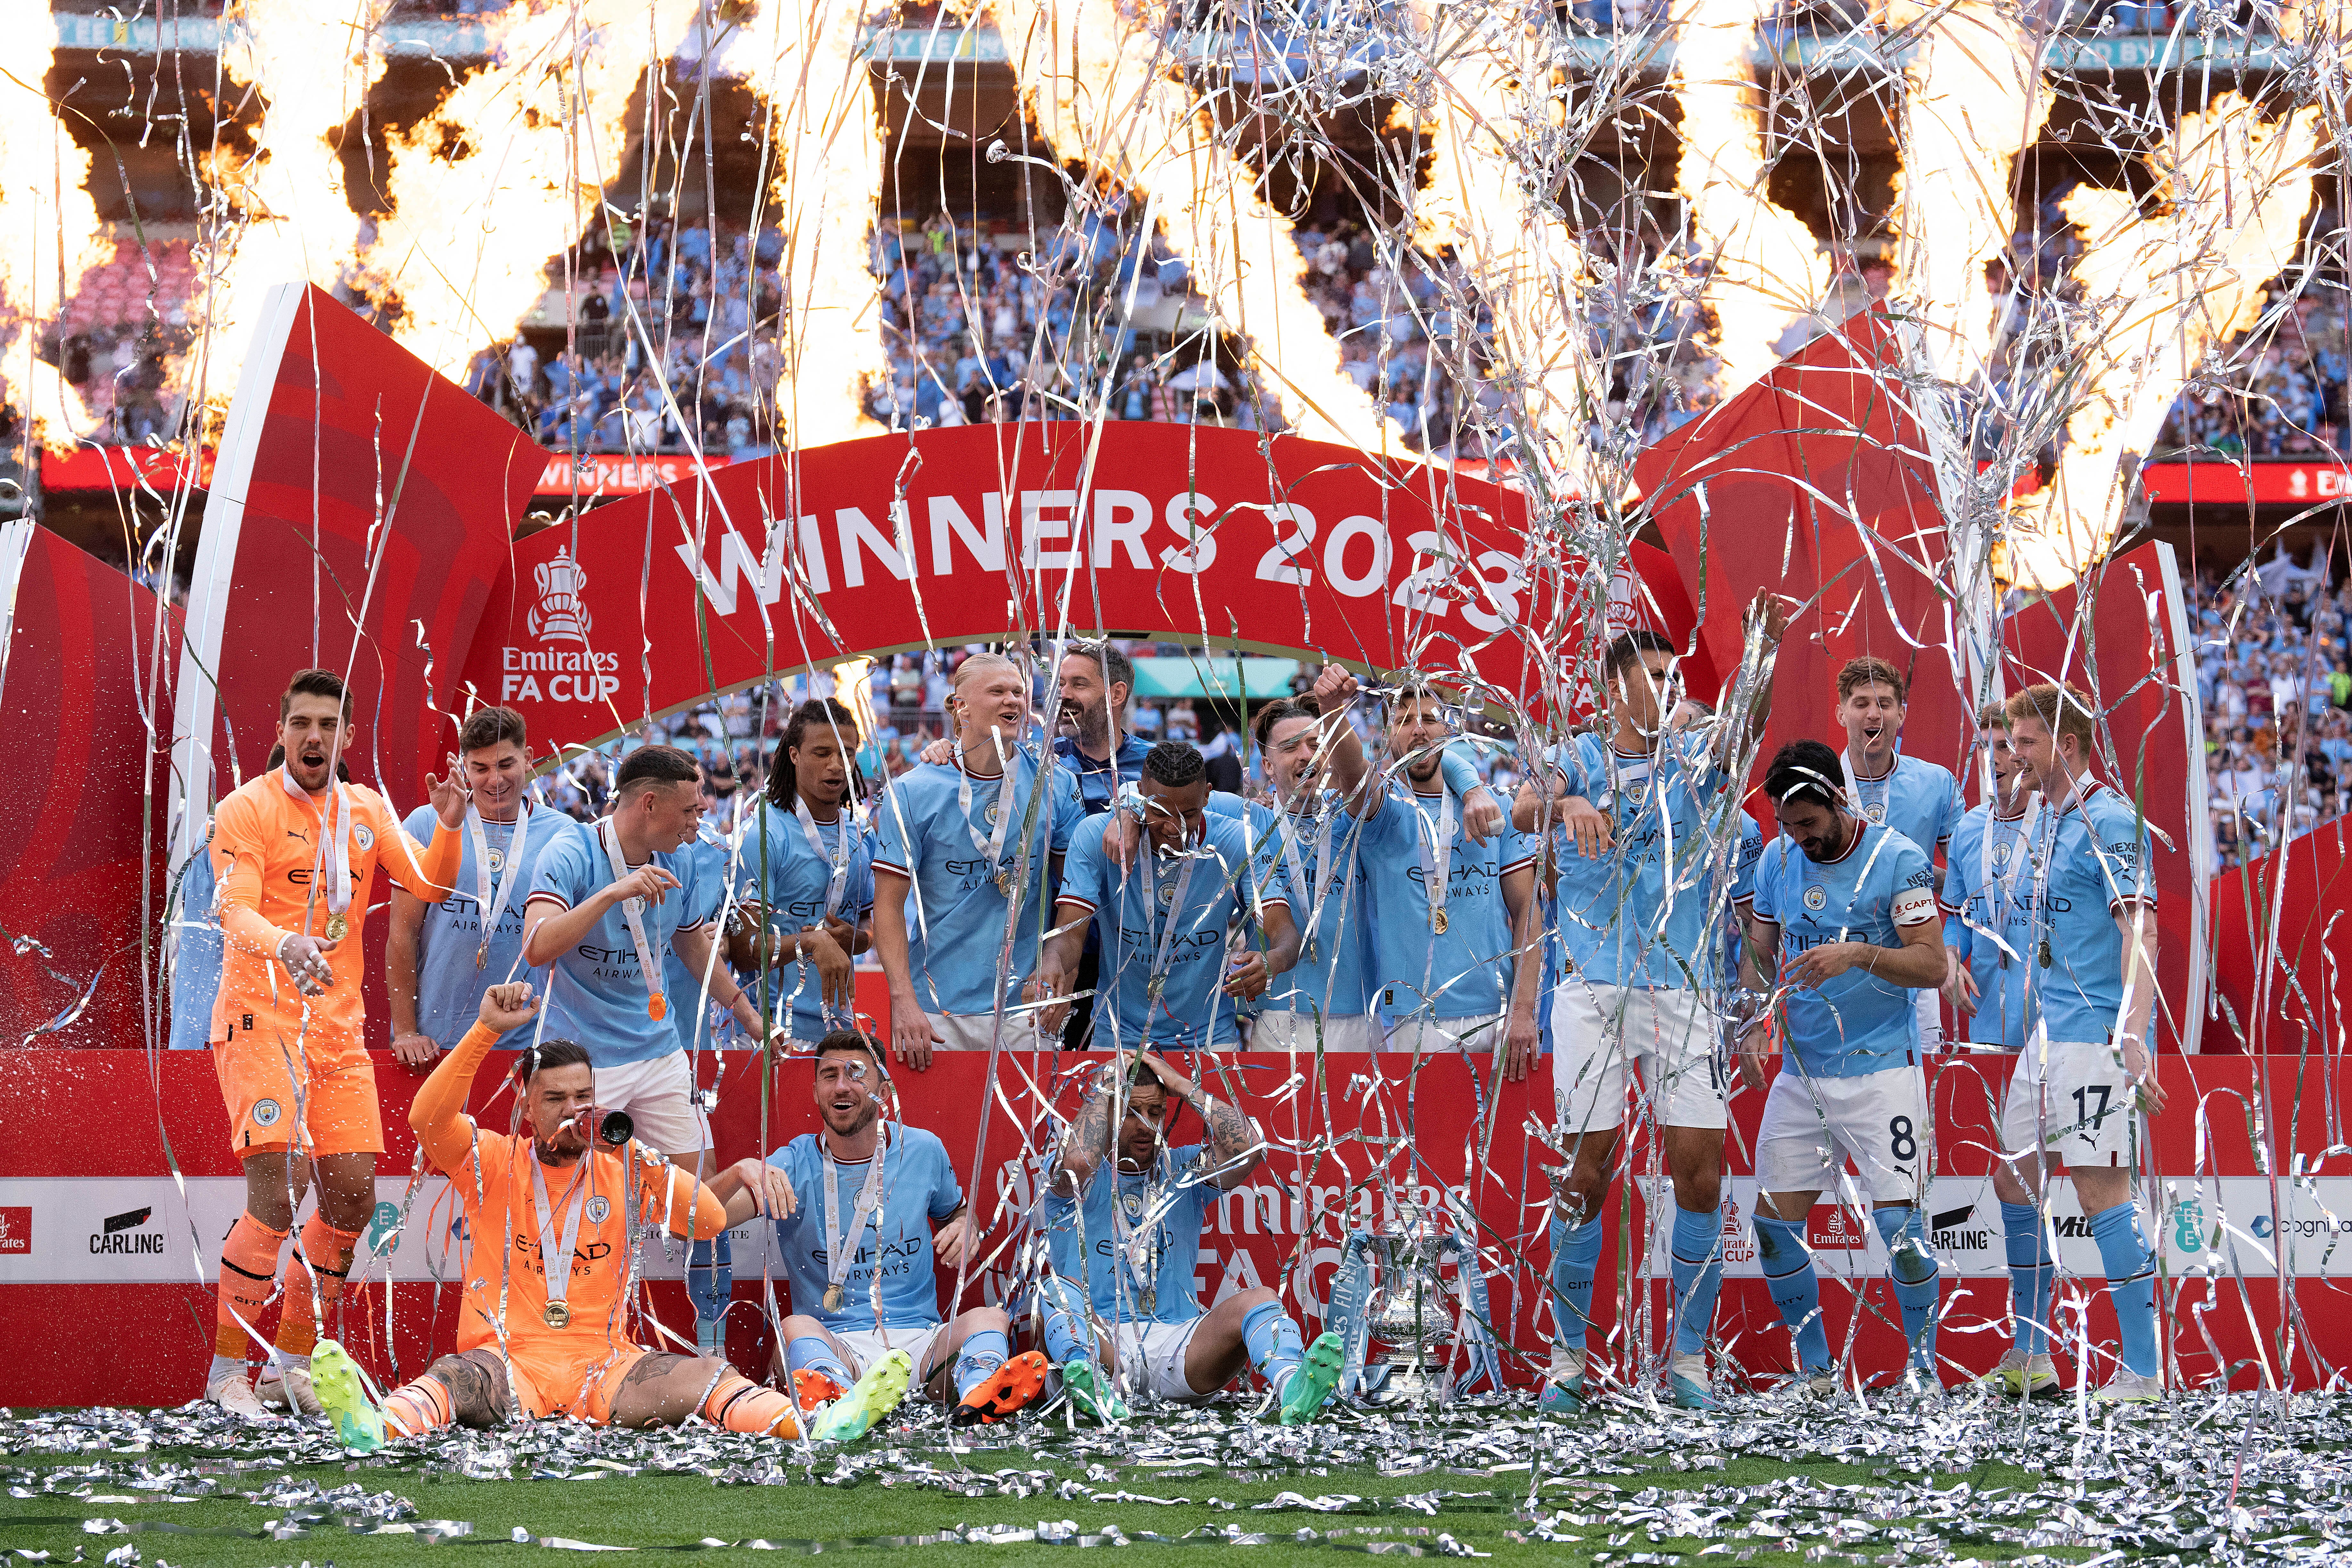 FA Cup Final 2023: Man City's victory over Manchester United provides no clues on how to stop them | The Independent